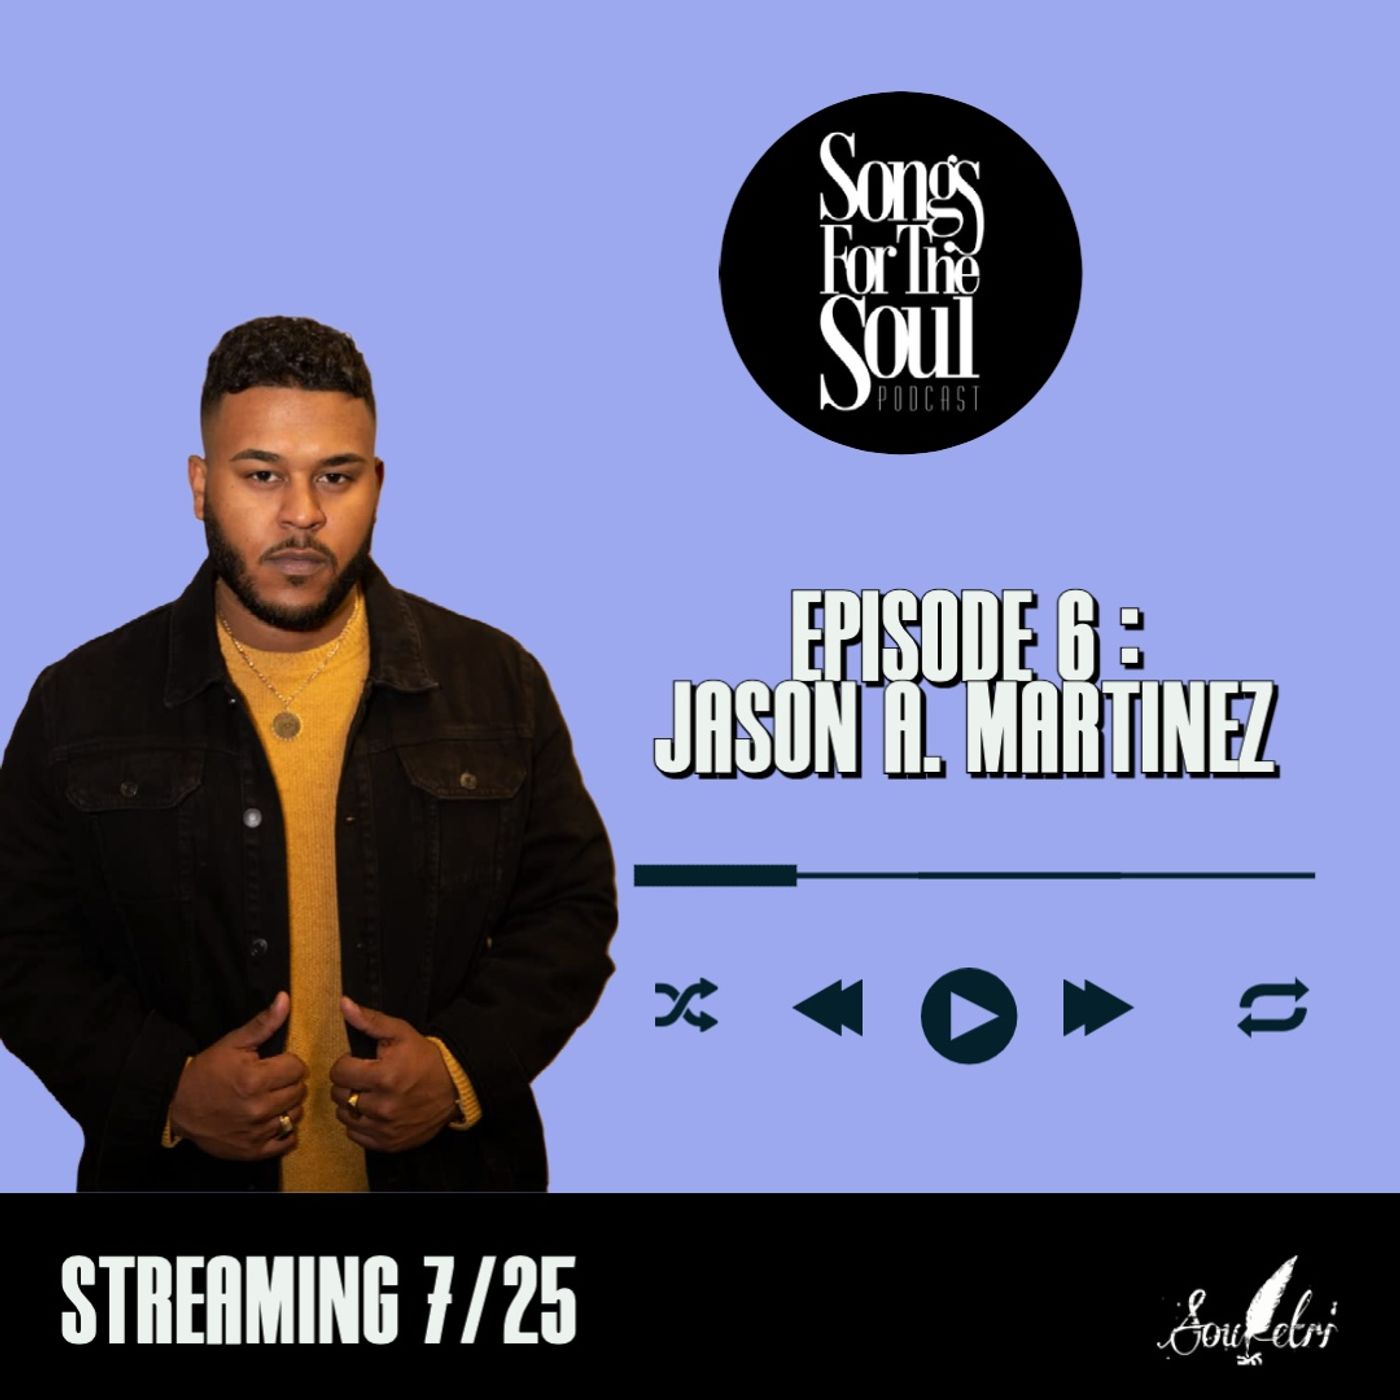 Songs for the Soul : Jason A. Martinez